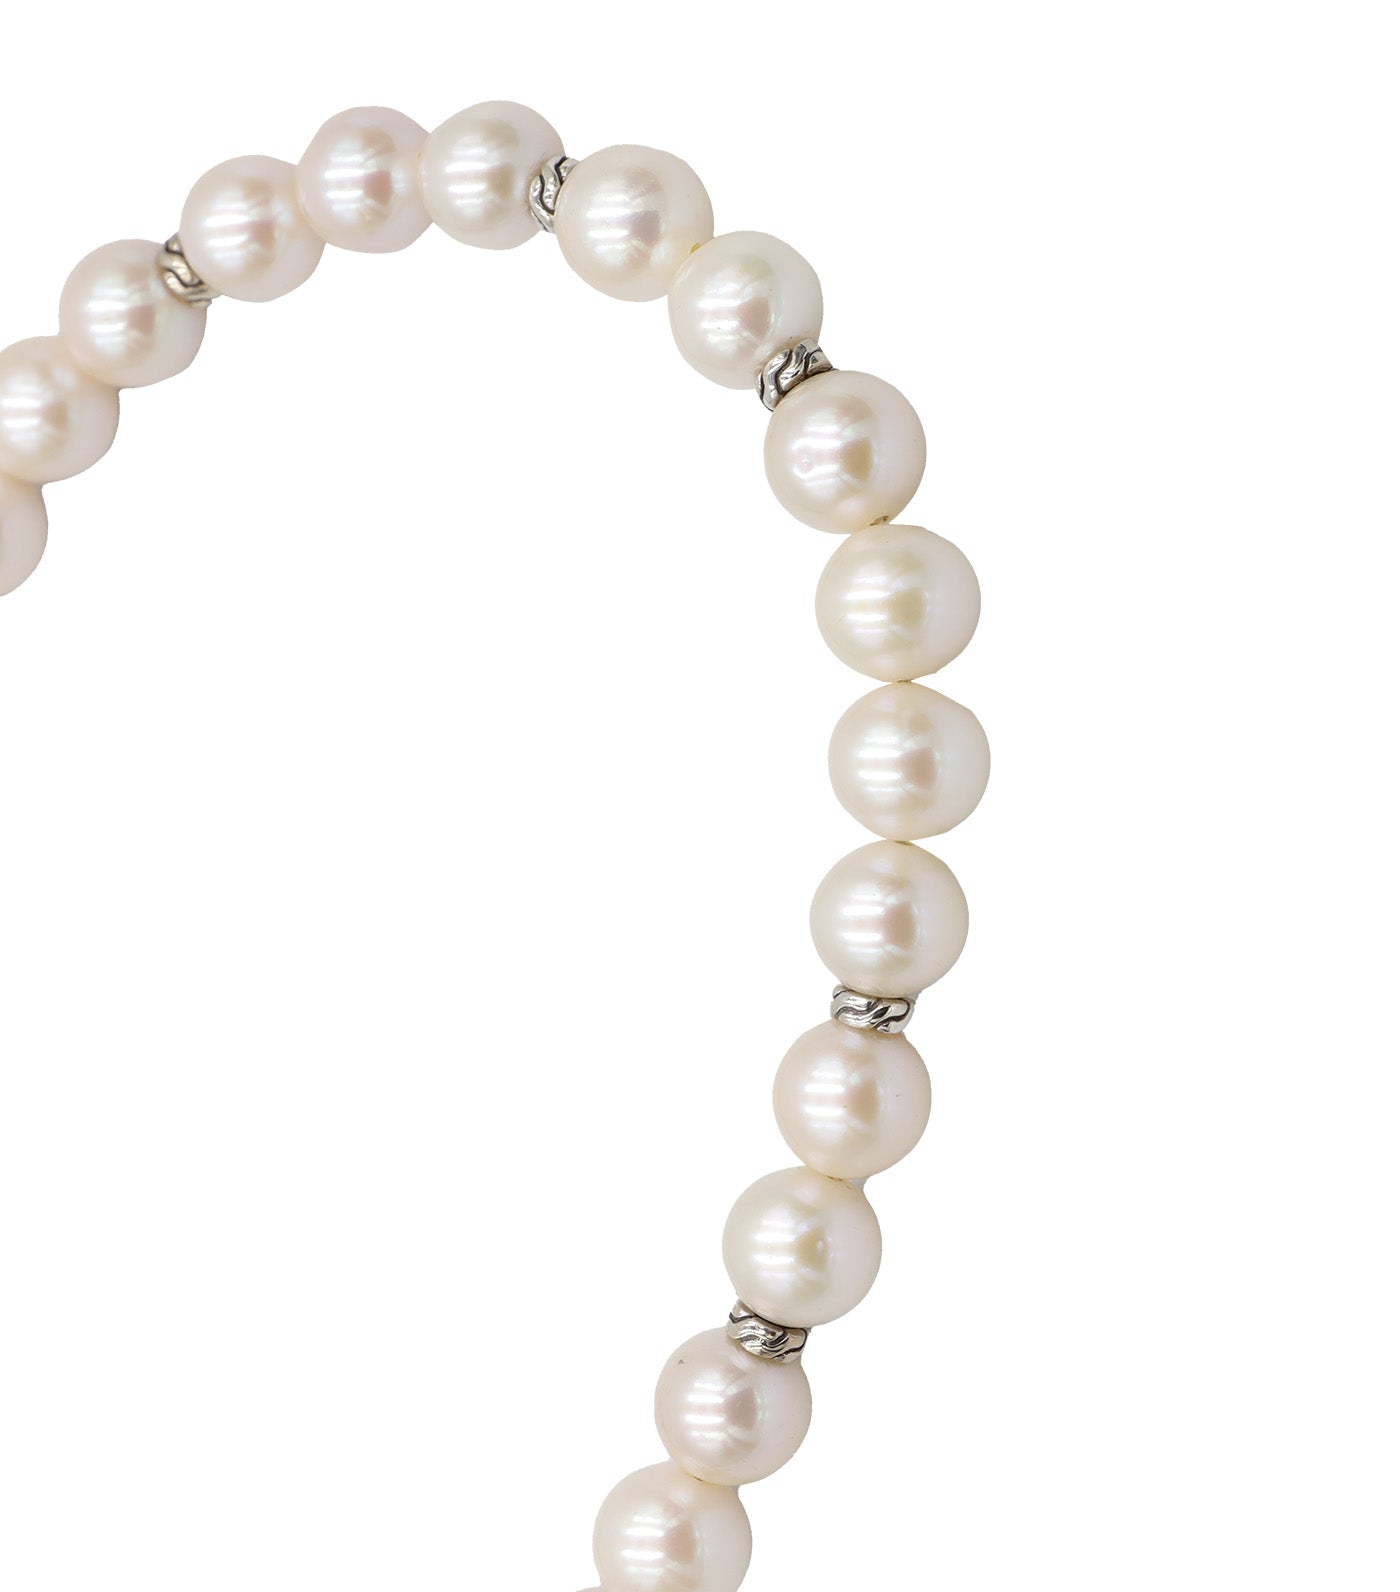 Asli Classic Chain Link Silver Necklace with Cultured Fresh Water Pearl